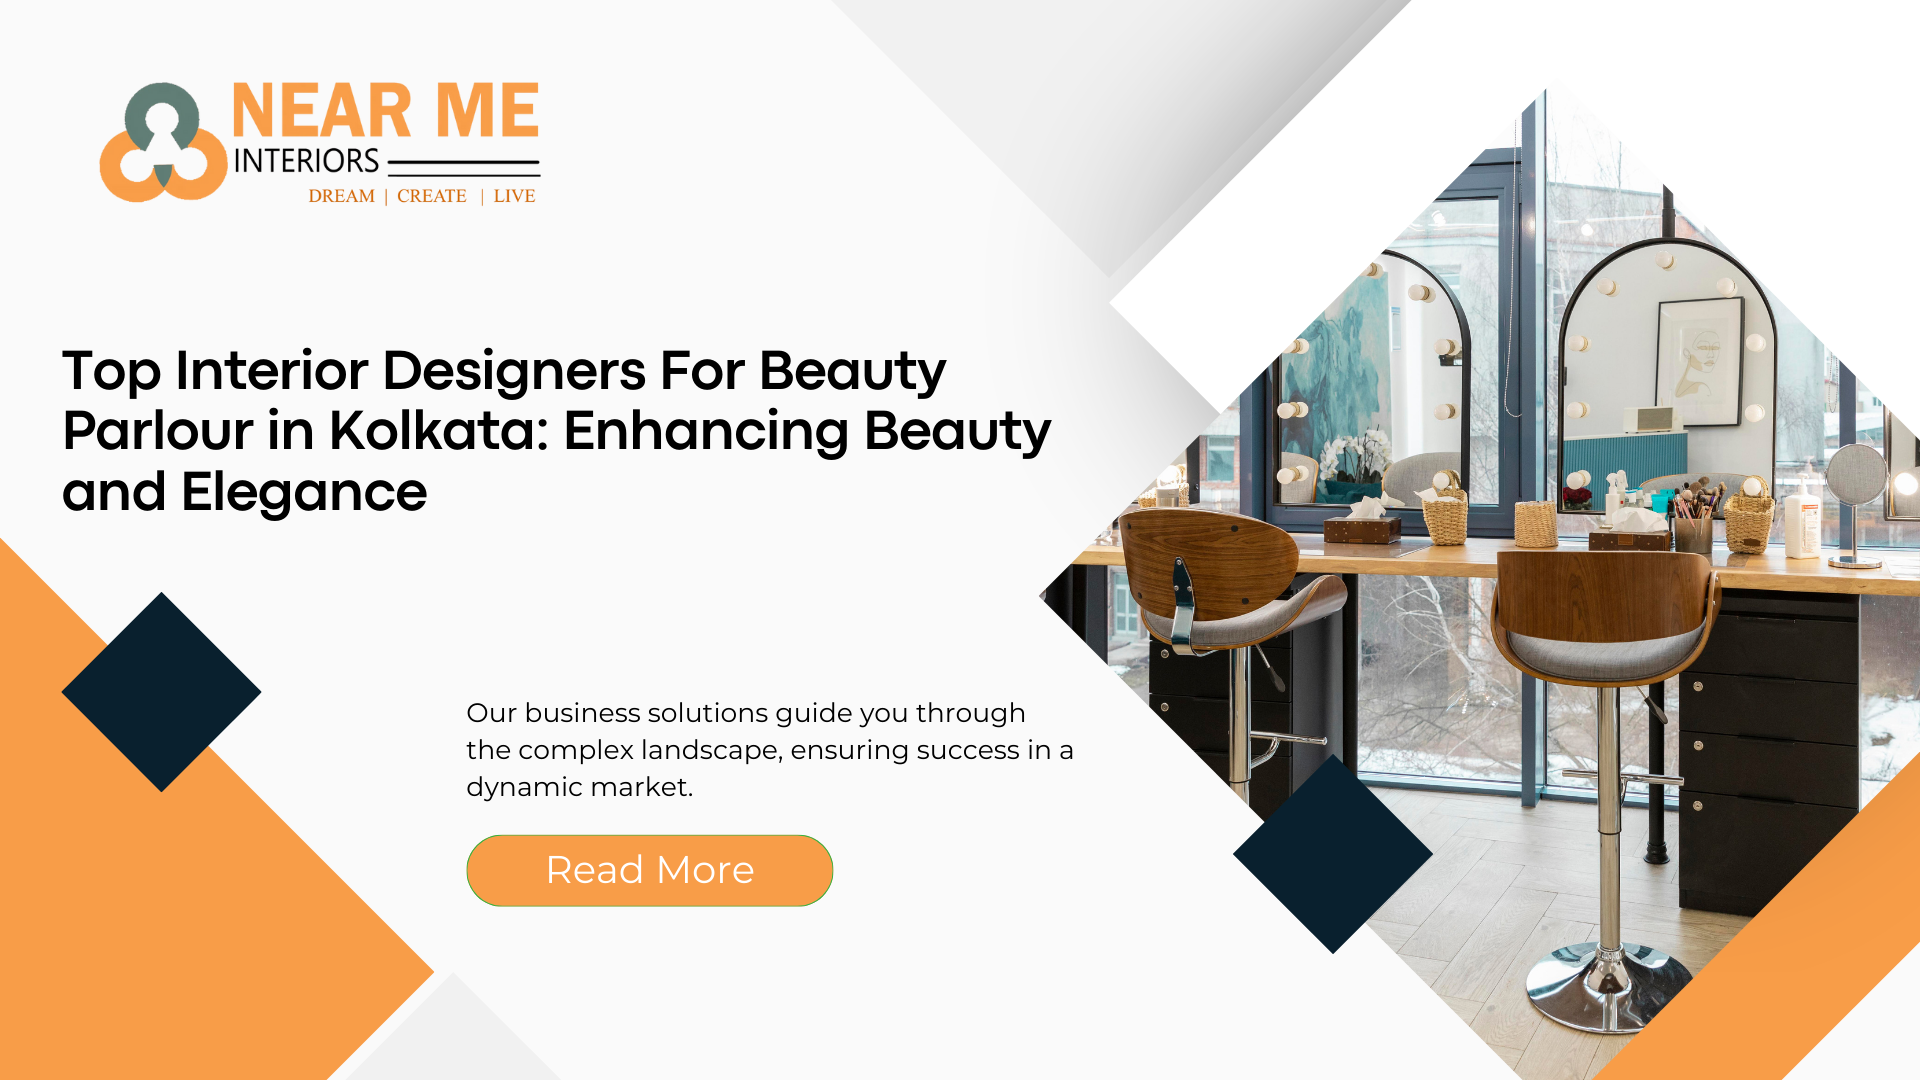 Top Interior Designers For Beauty Parlour in Kolkata: Enhancing Beauty and Elegance